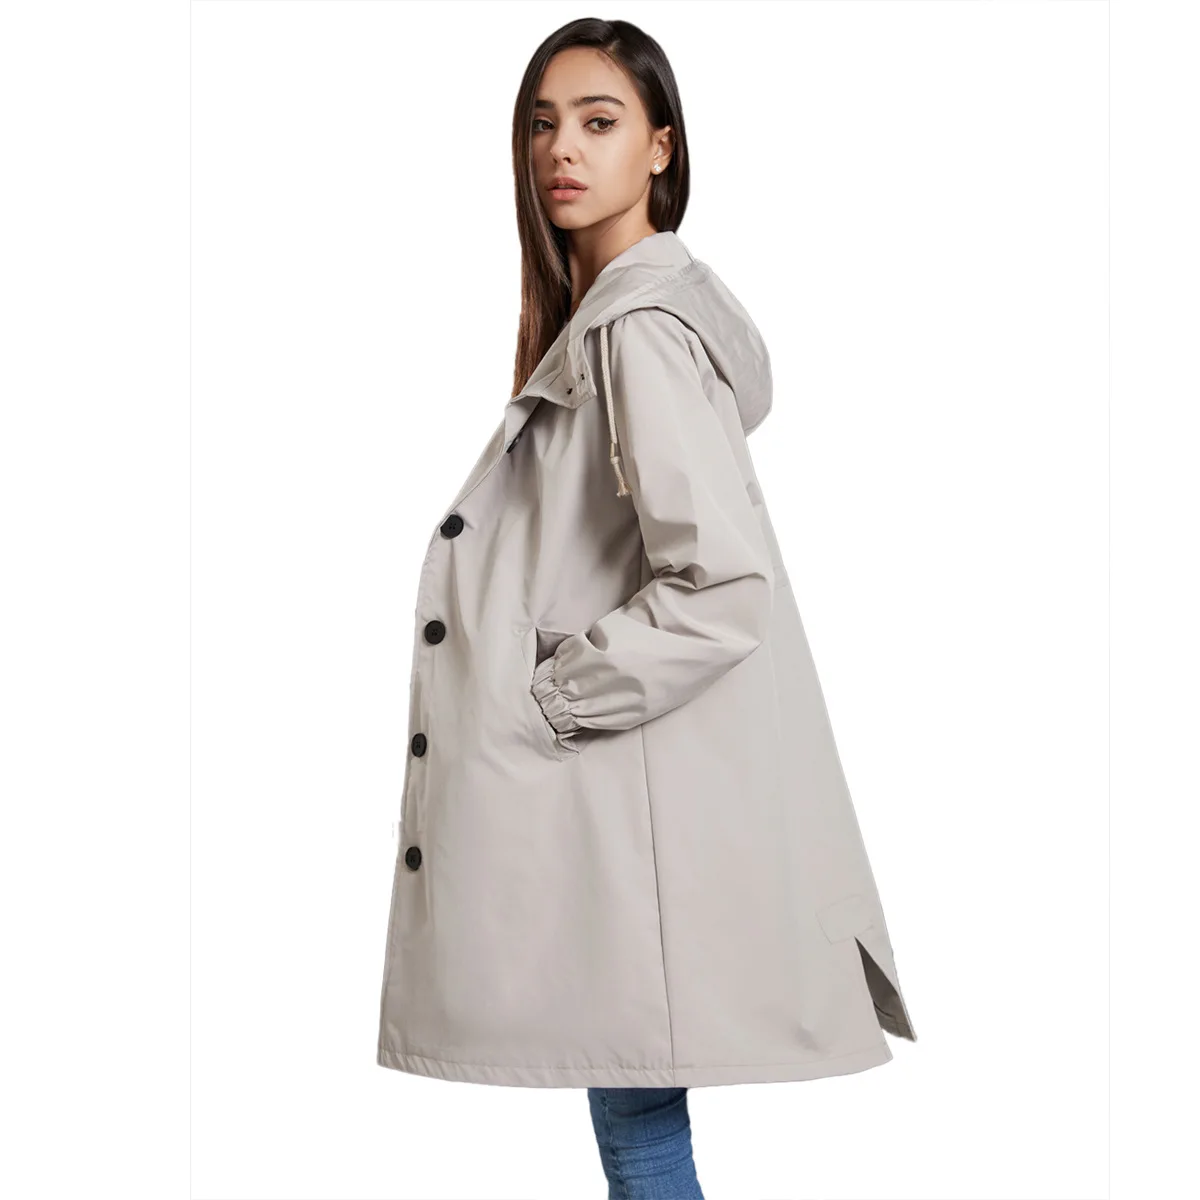 Autumn and winter new waterproof hooded trench coat women's casual long coat women's loose women's clothing free shipping offers